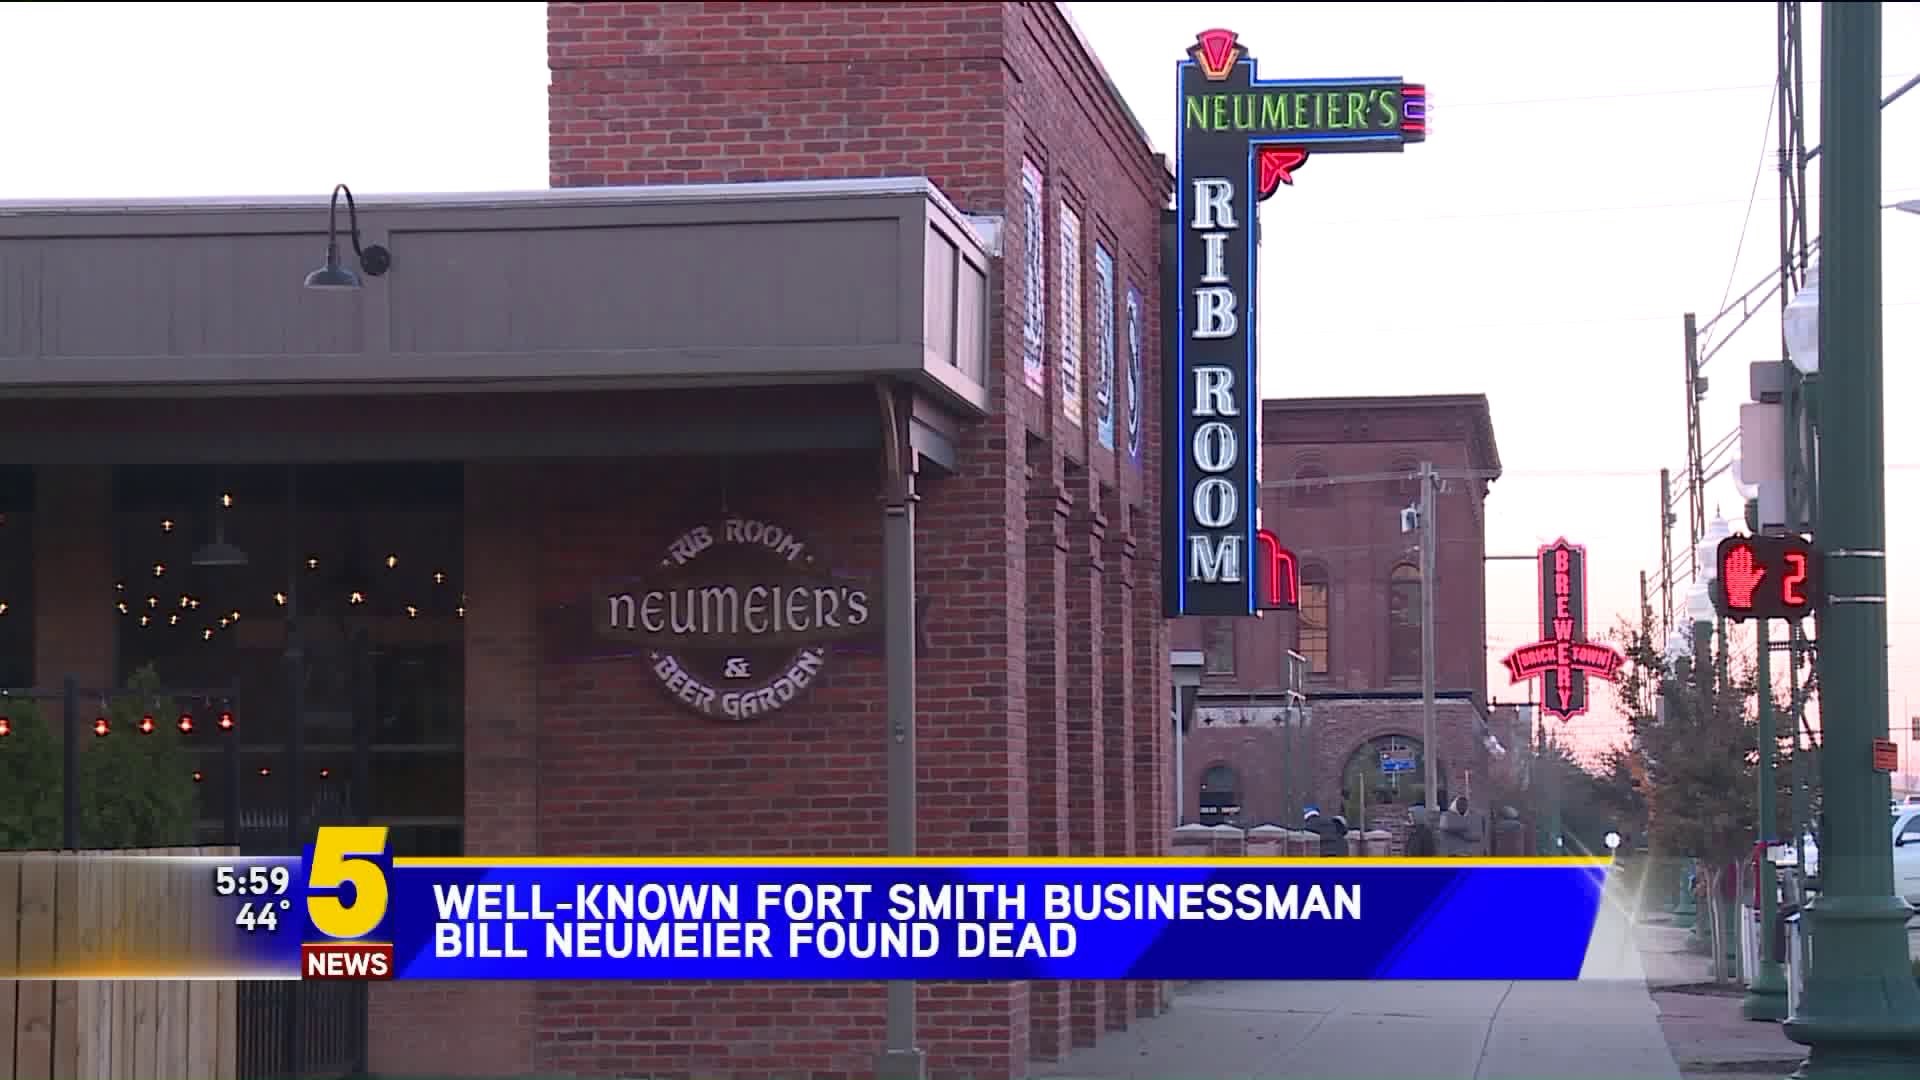 fort smith restaurants downtown